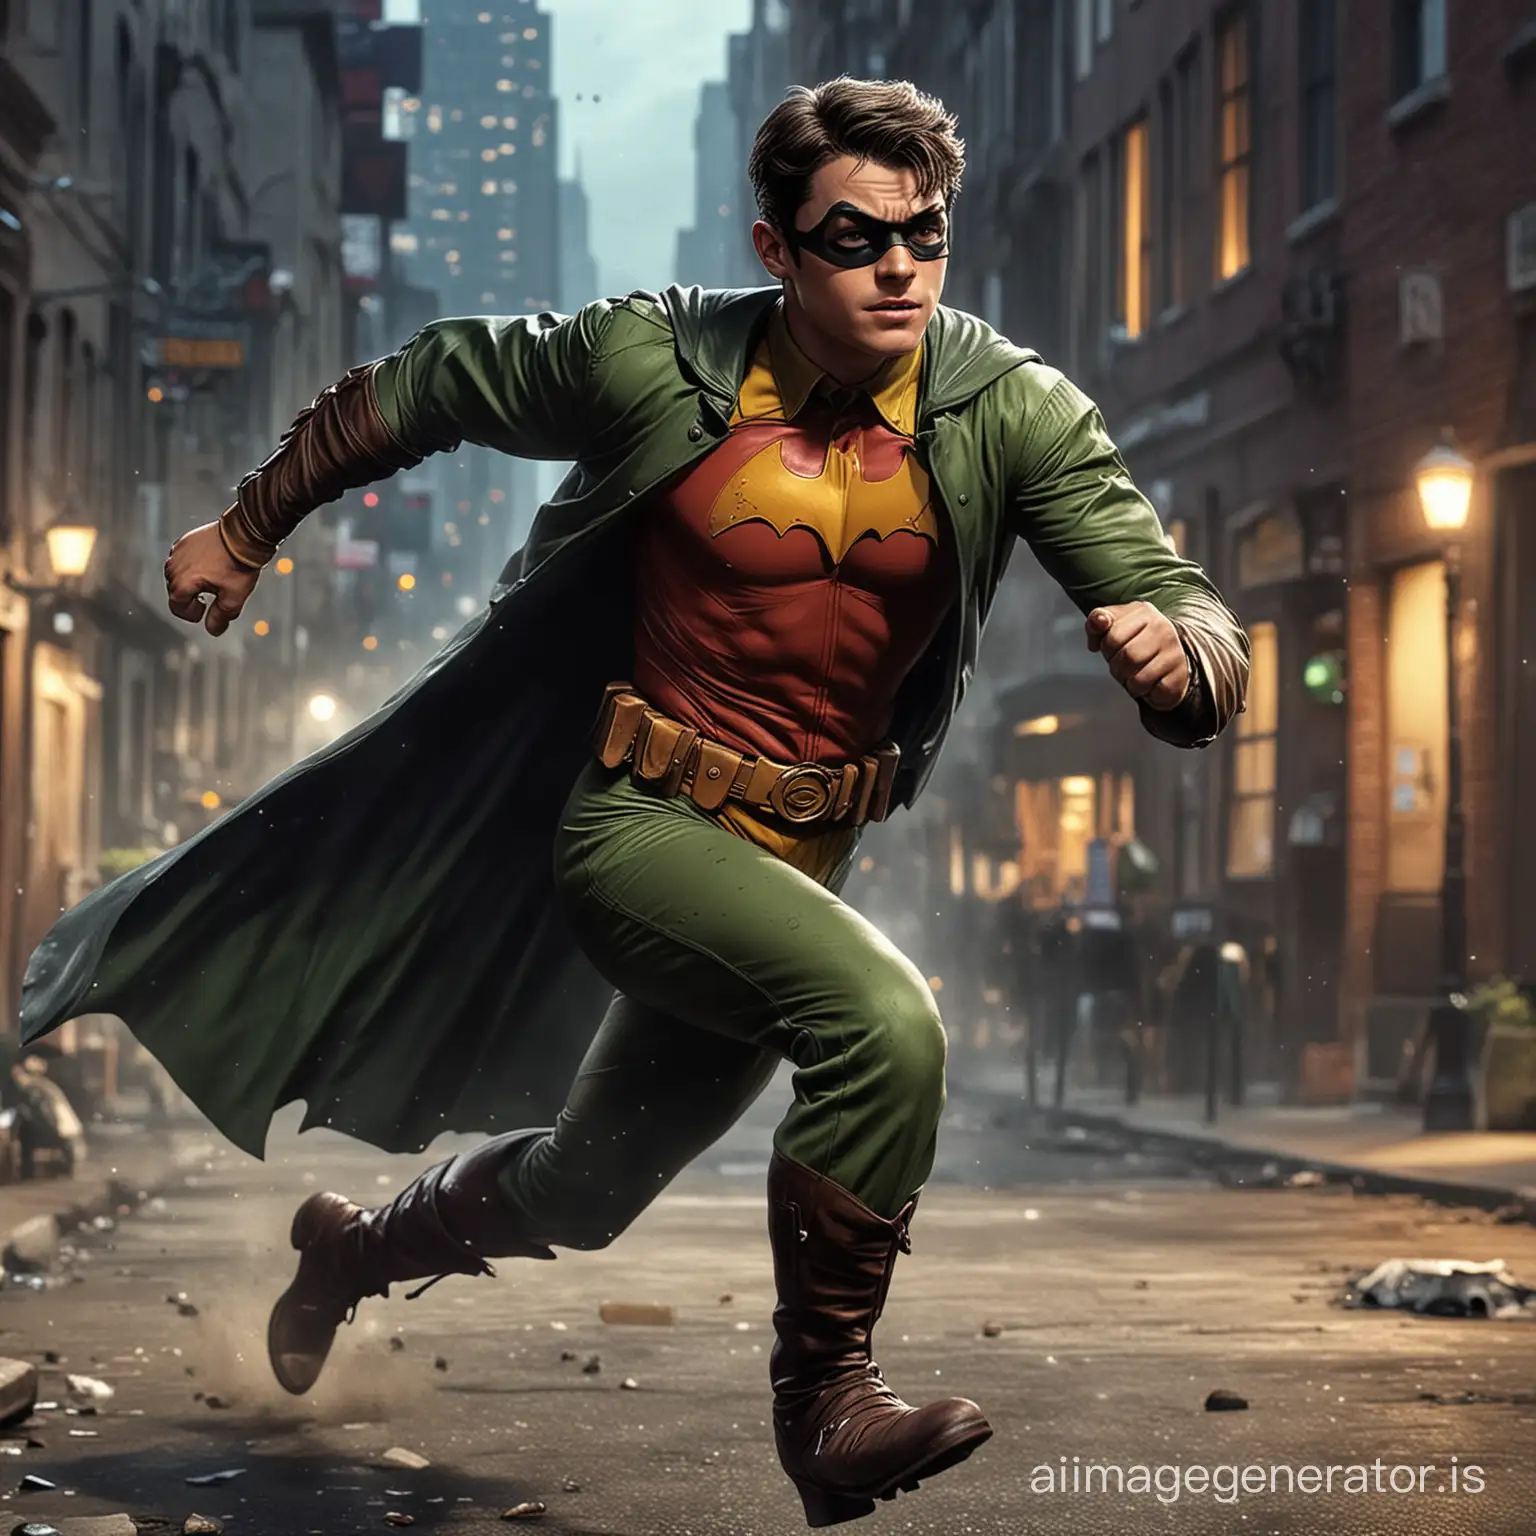 Realistic picture of Robin from the Batman comics. Accurate. Robin is running through a 1940s American city by night. Robin the boy wonder. Robin looks like in his very first appearance in comics. Robin with his suit from the old Batman comics by Bob Cane. Robin. Batman comics. Comicaccurate. Retro. Suit from the comics. First Robin ever. First appearance in comics. Realistic. Live-action. Robin running.